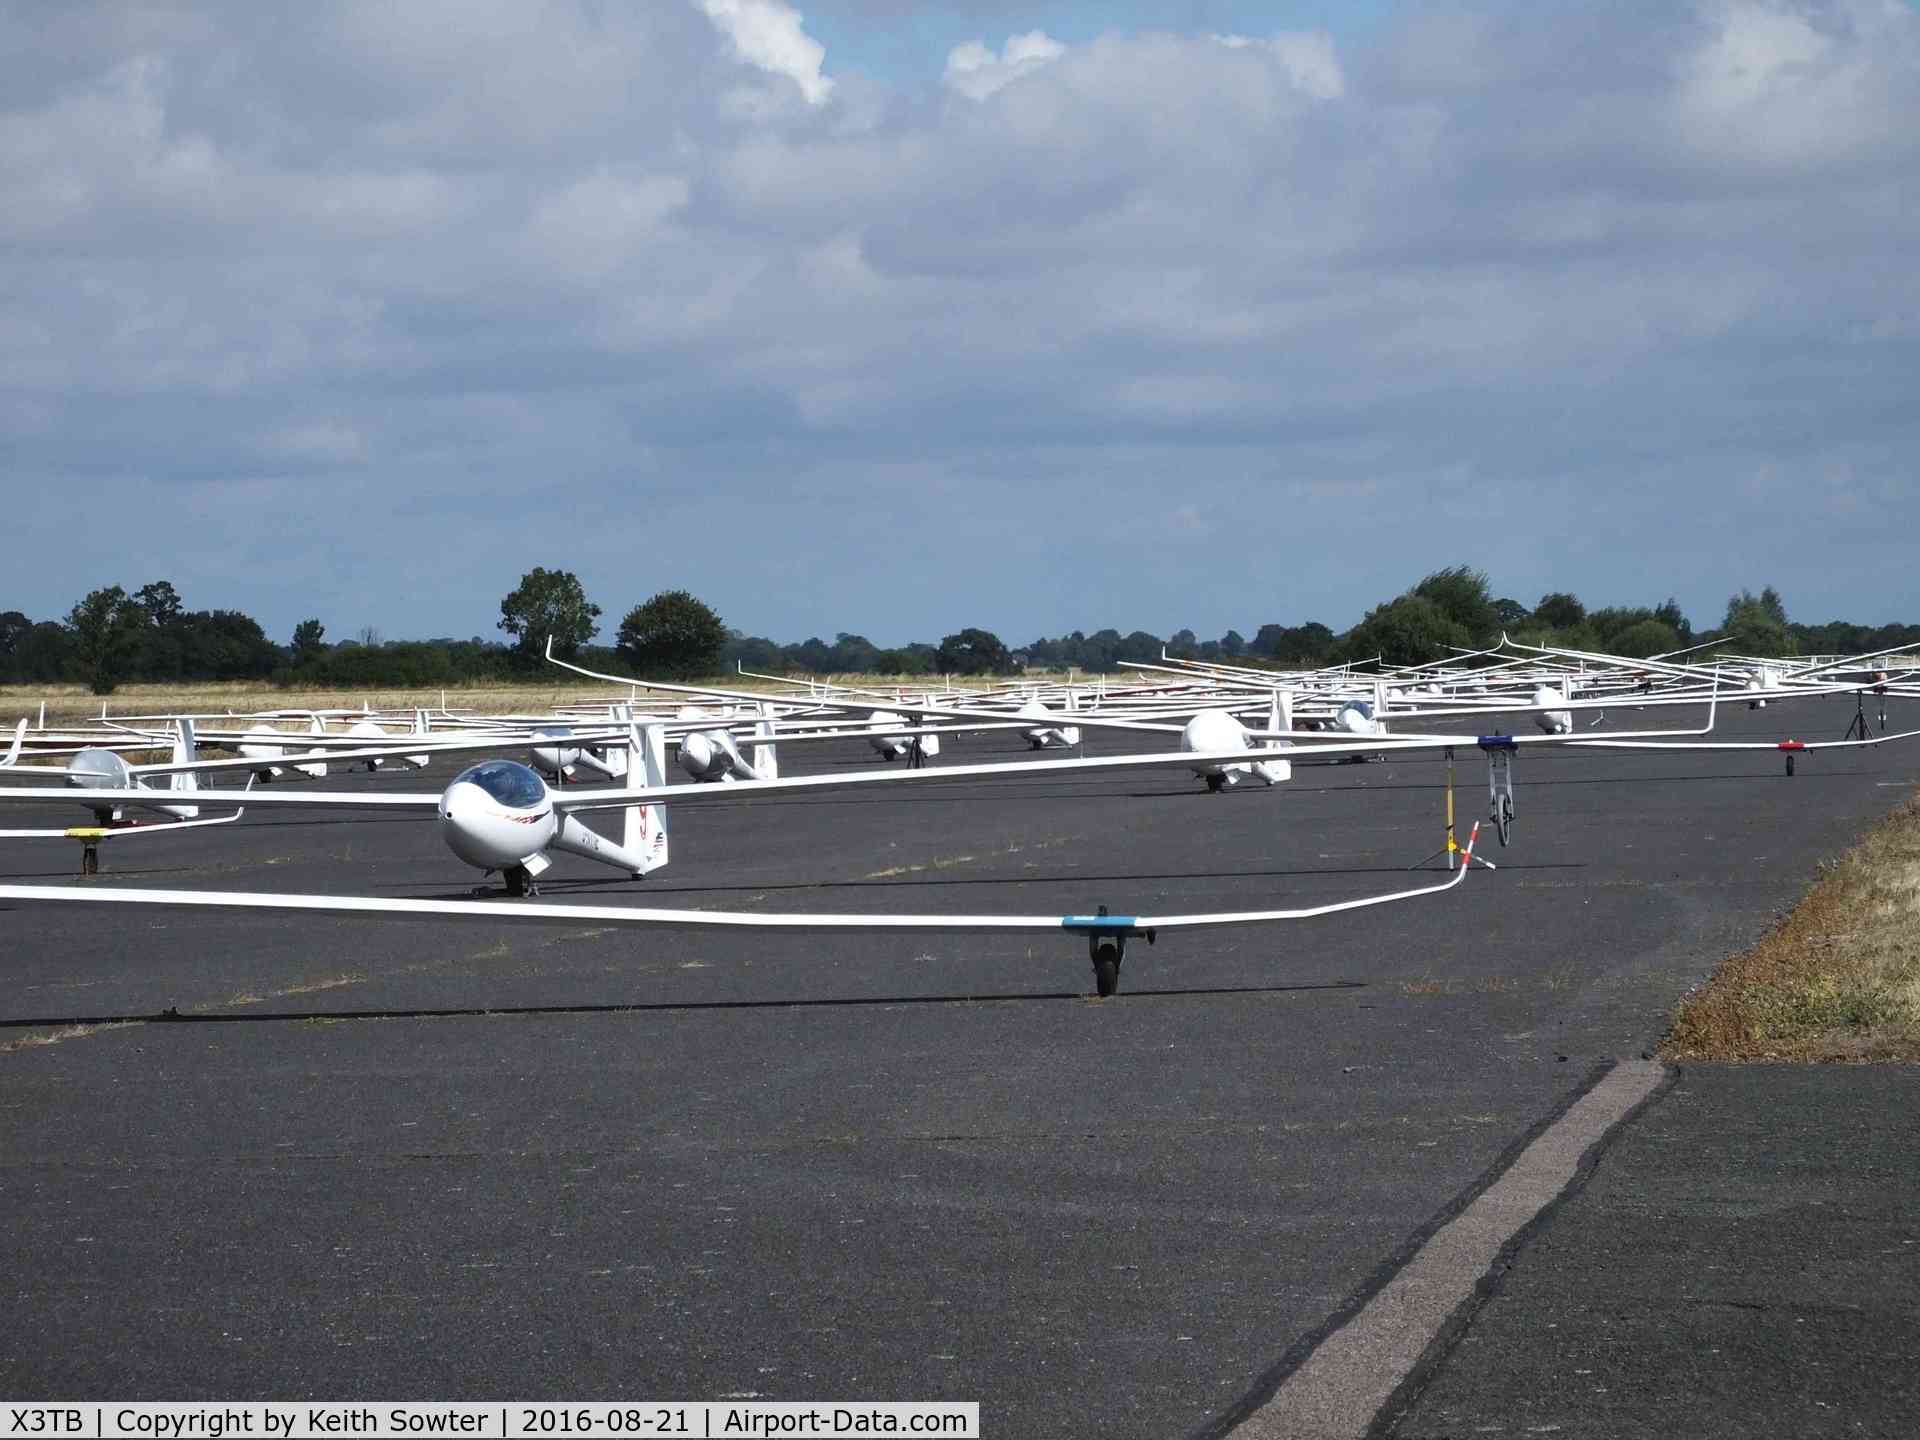 X3TB Airport - Launch grid of a glider Competition at Tibenham